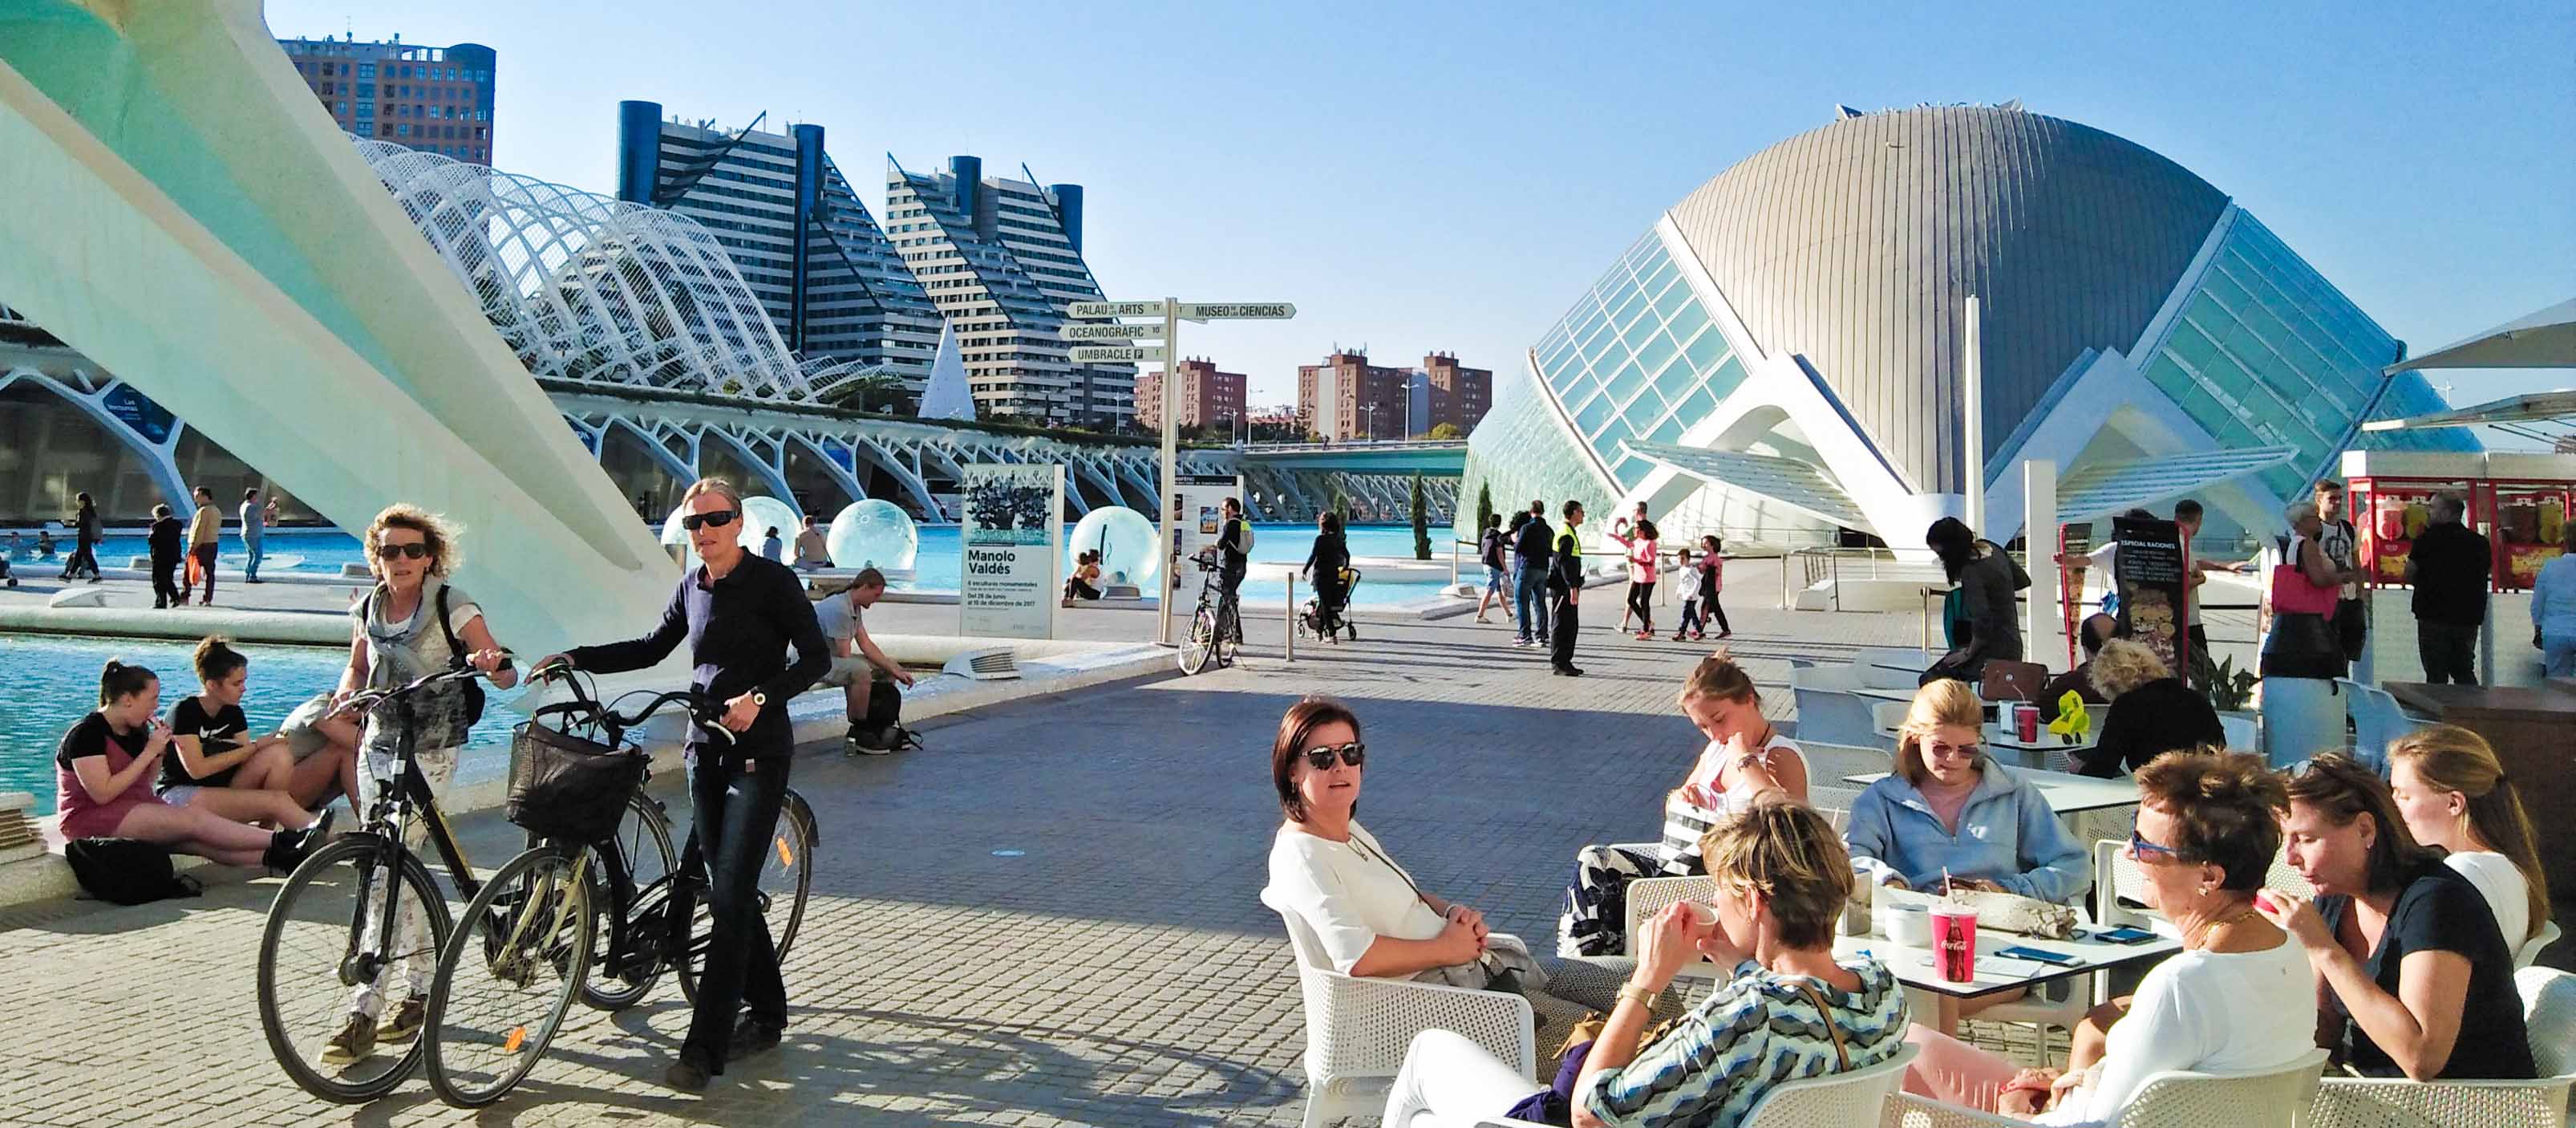 Tourists enjoying the summer by dining outside, walking their bicycles, sitting near the pool, and chatting with everyone else in Ciudad de las Artes y las Ciencias, Valencia, Spain.